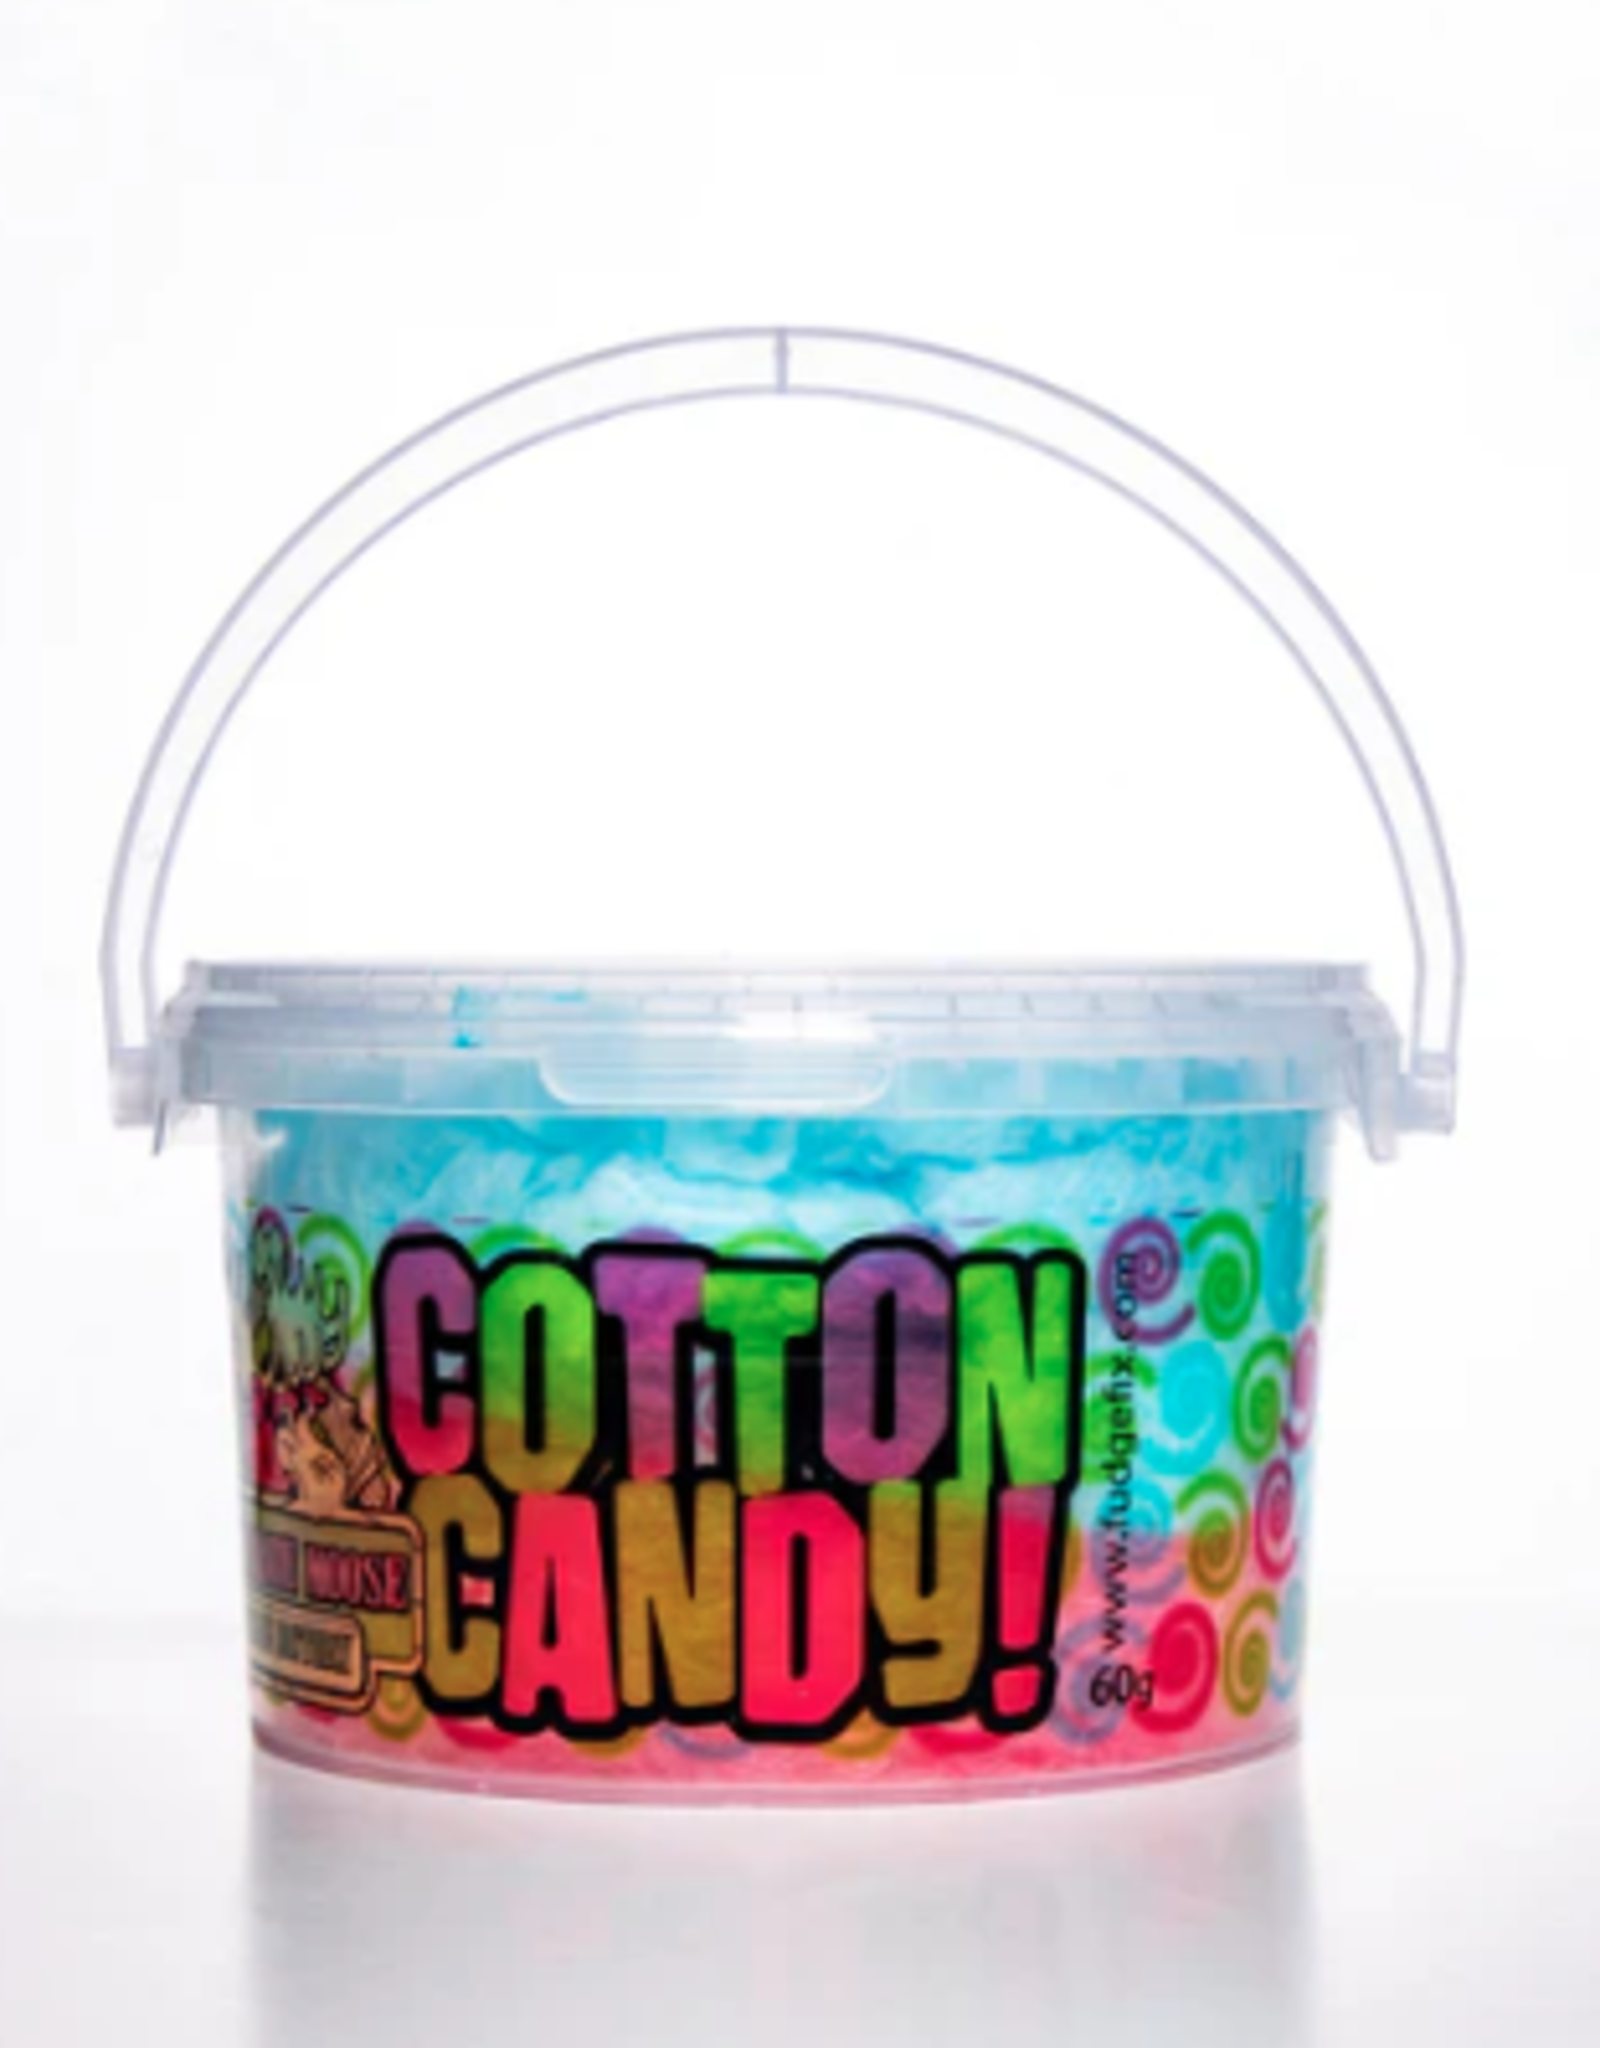 Chocolate Moose Fudge Factory Cotton Candy 90gr